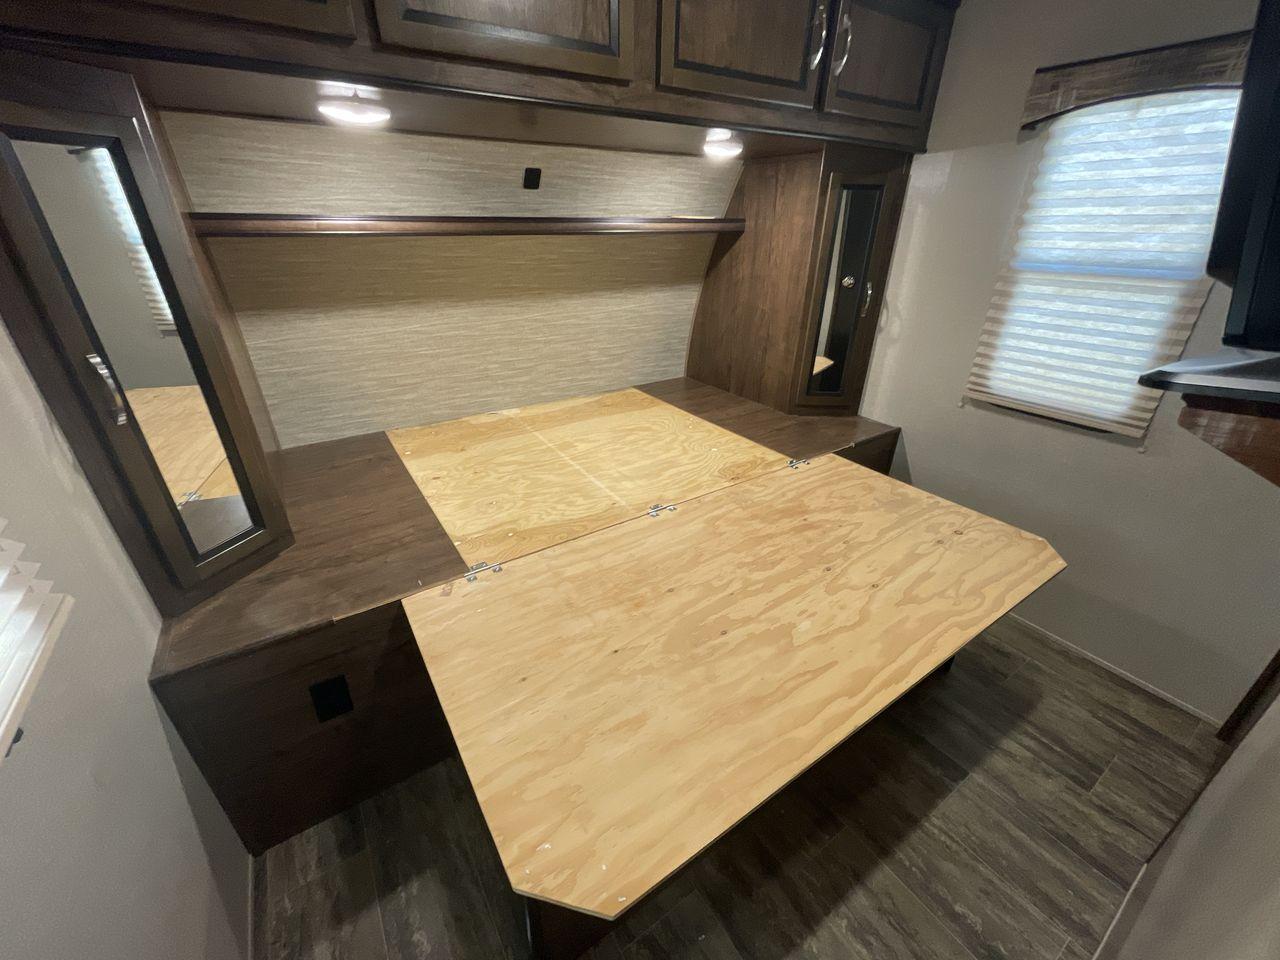 2018 CRUISER RADIANCE 28QD (5RXFB3324J2) , Length: 33.33 ft. | Dry Weight: 6,025 lbs. | Gross Weight: 9,600 lbs. | Slides: 1 transmission, located at 4319 N Main St, Cleburne, TX, 76033, (817) 678-5133, 32.385960, -97.391212 - The 2018 Cruiser RV Radiance 28QD seamlessly blends style, comfort, and functionality to redefine your camping experience. Measuring 33 feet in length, this RV is designed for spacious and lightweight towing. The aluminum frame construction ensures durability while maintaining a manageable weight fo - Photo #17